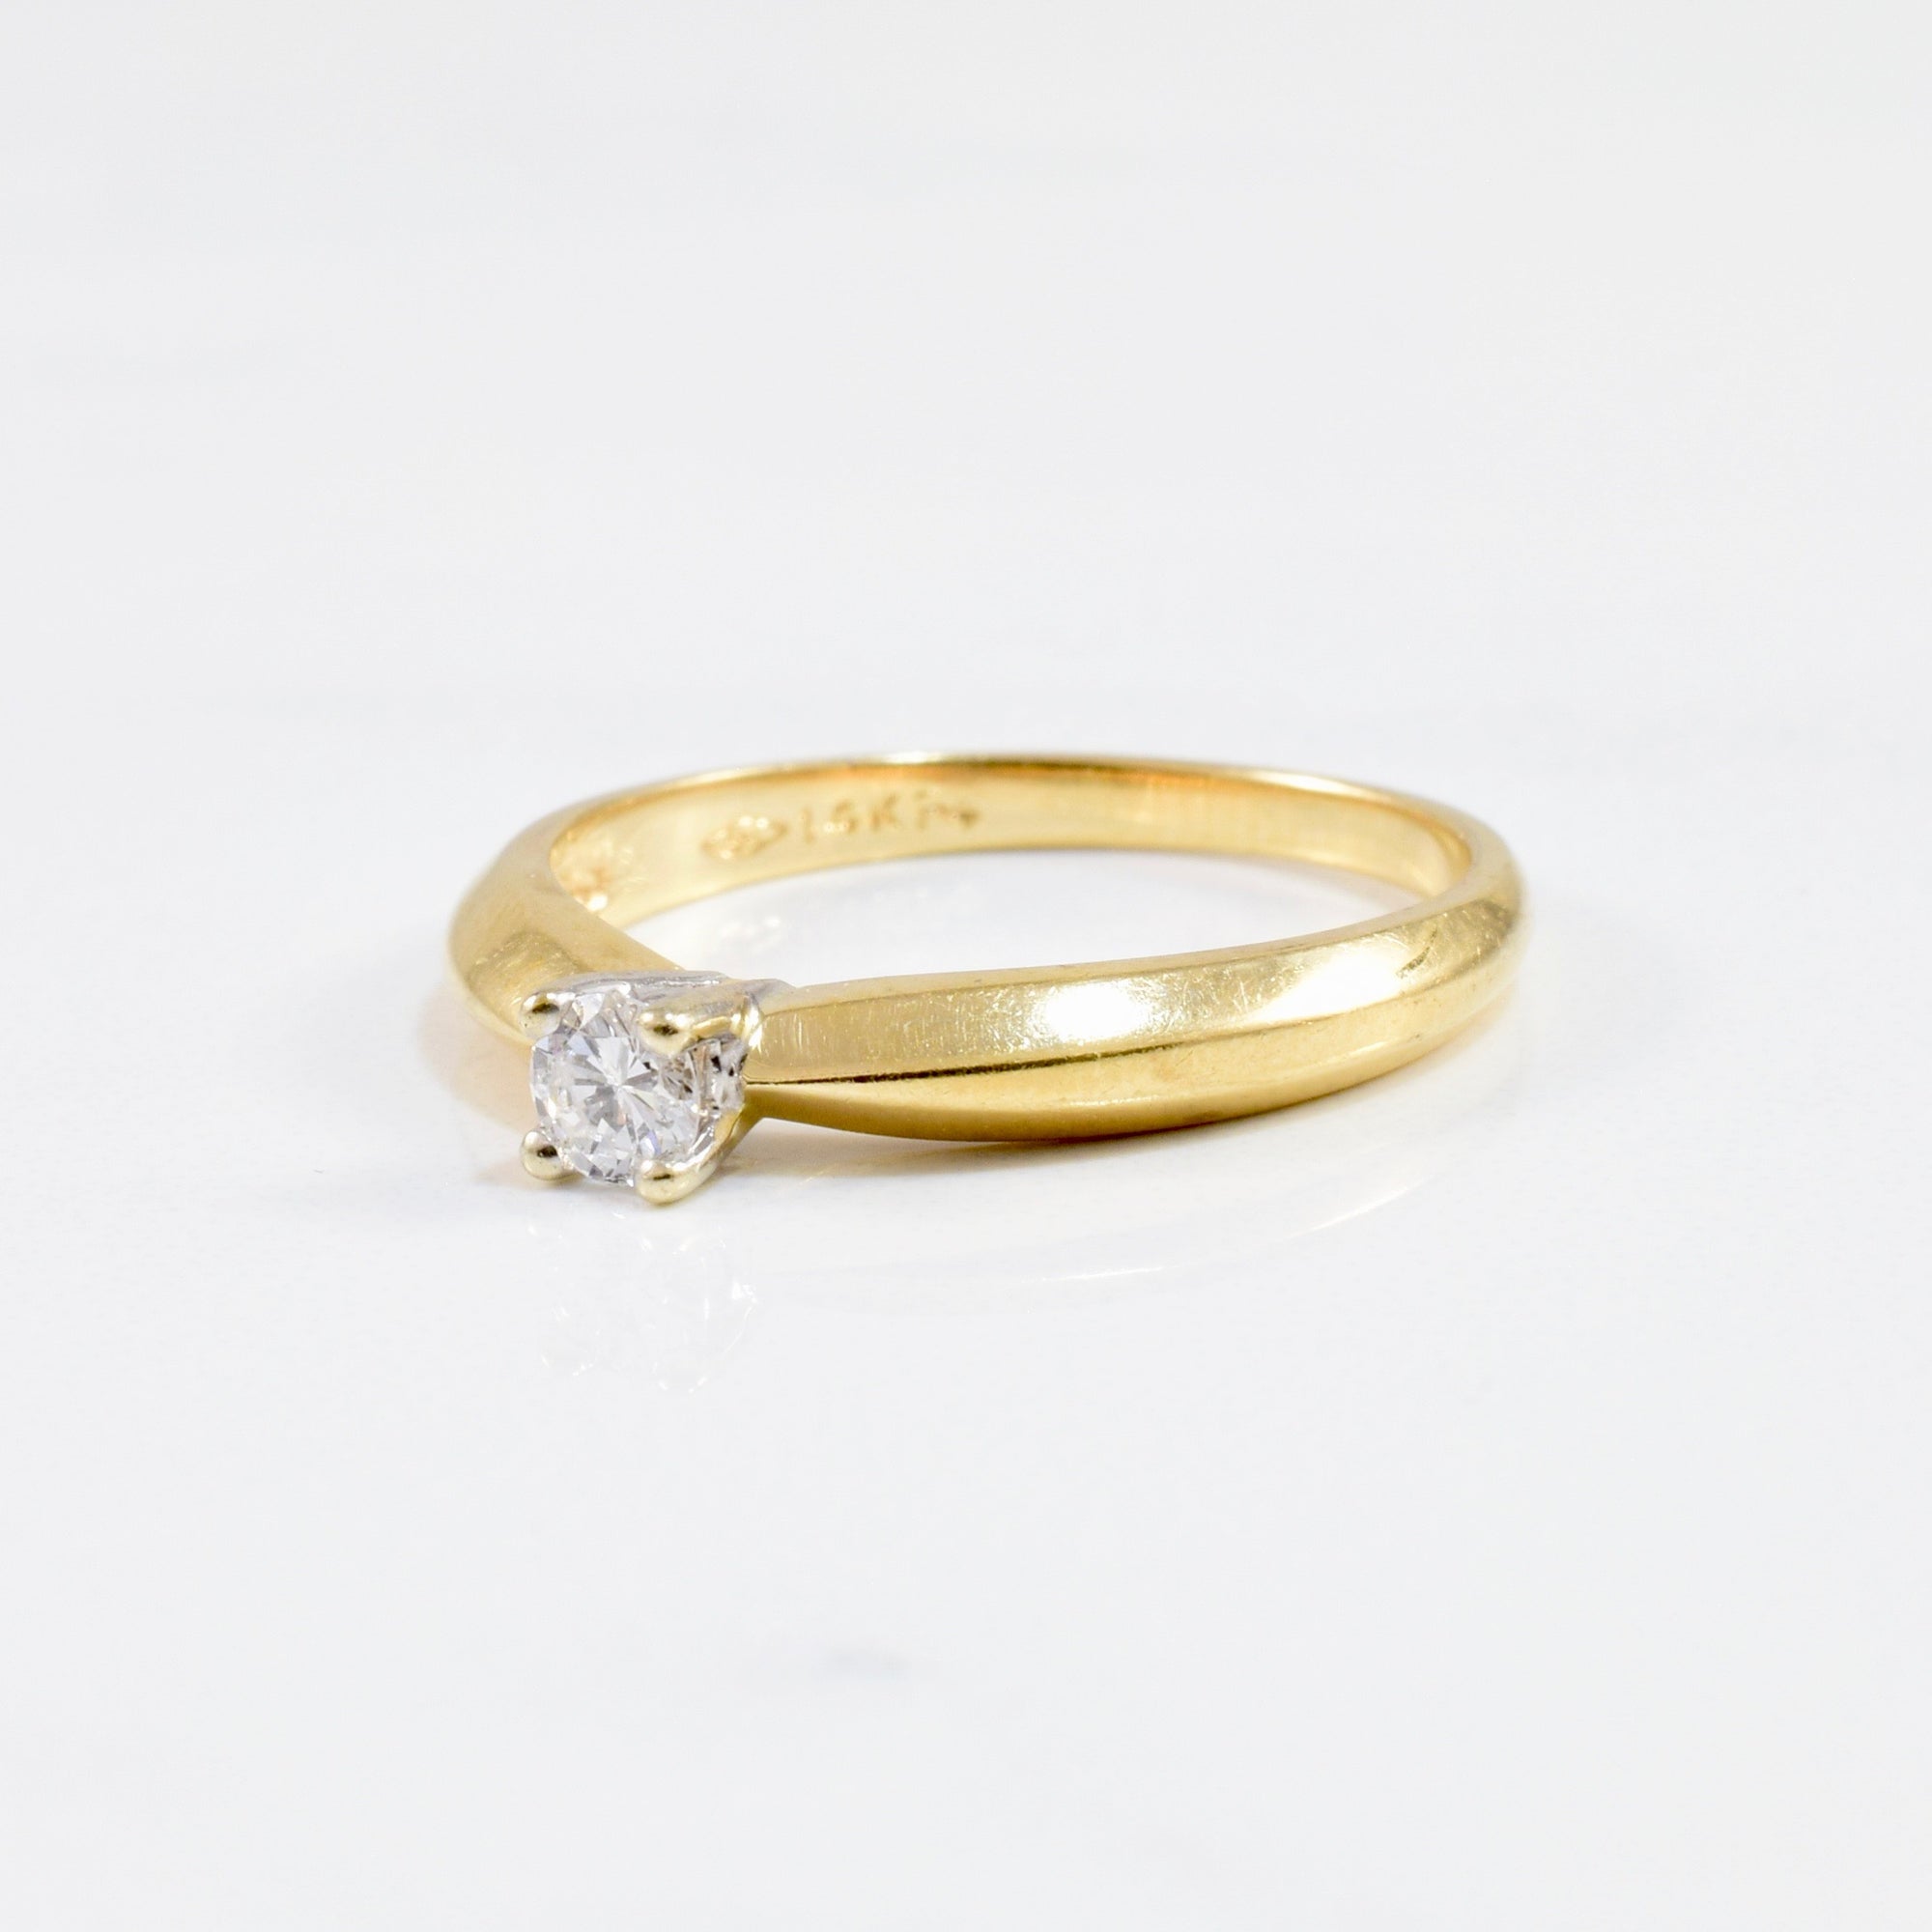 Bevelled Edge Solitaire Engagement Ring | 0.14 ct SZ 6.5 |